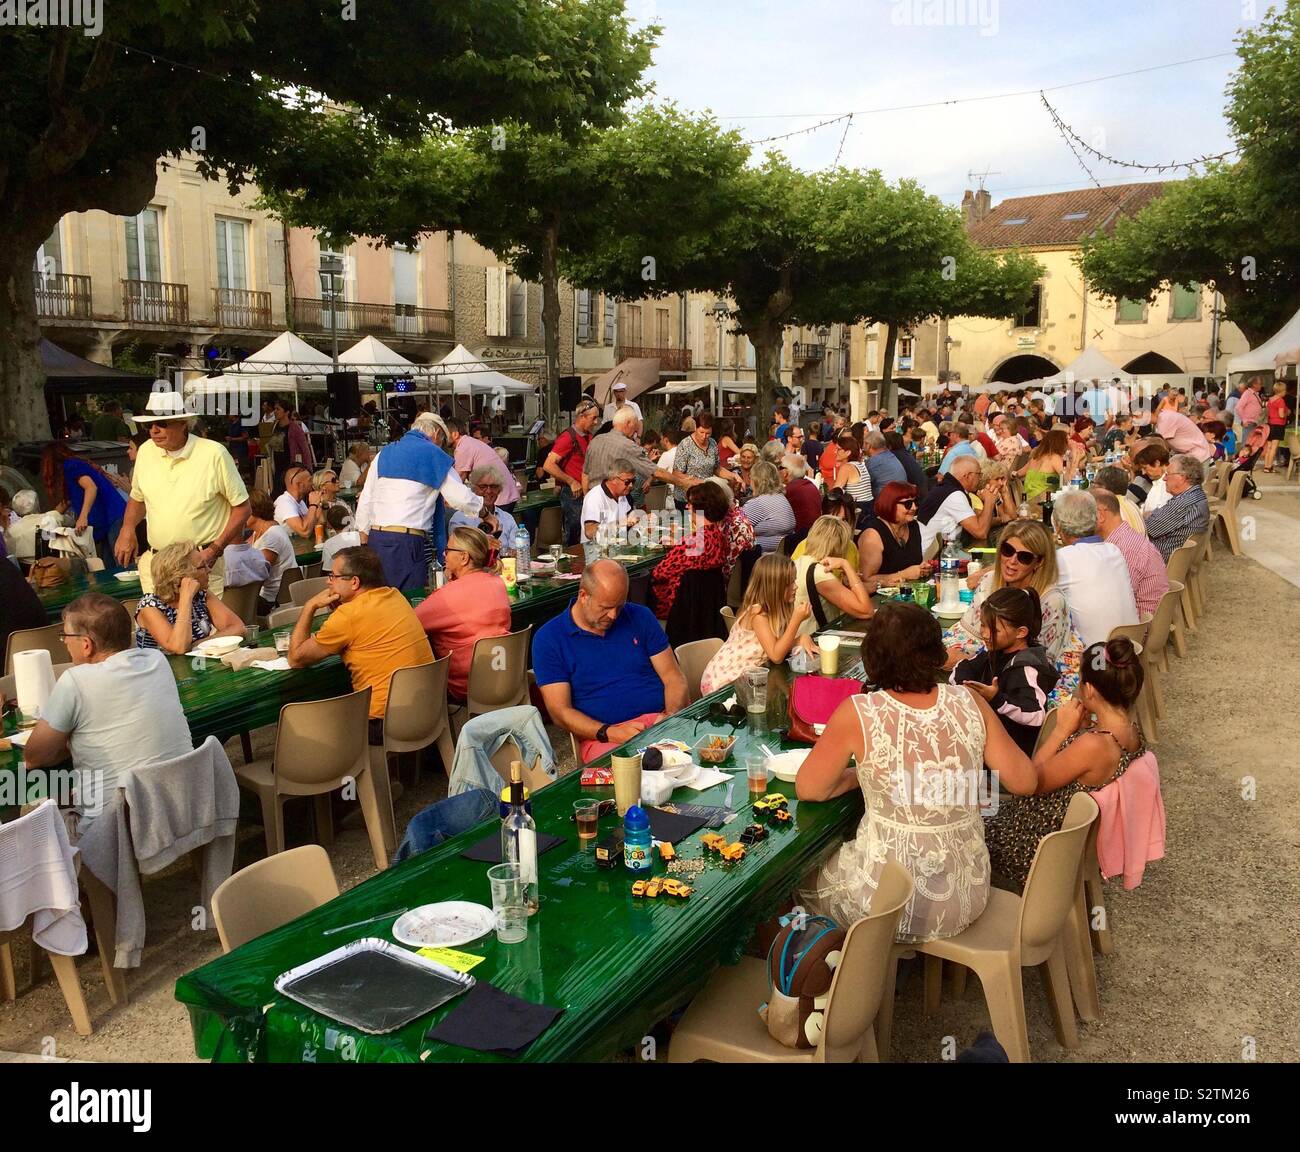 Midweek, all-ages, village get-together for eating and drinking in Sos, Aquitaine Stock Photo